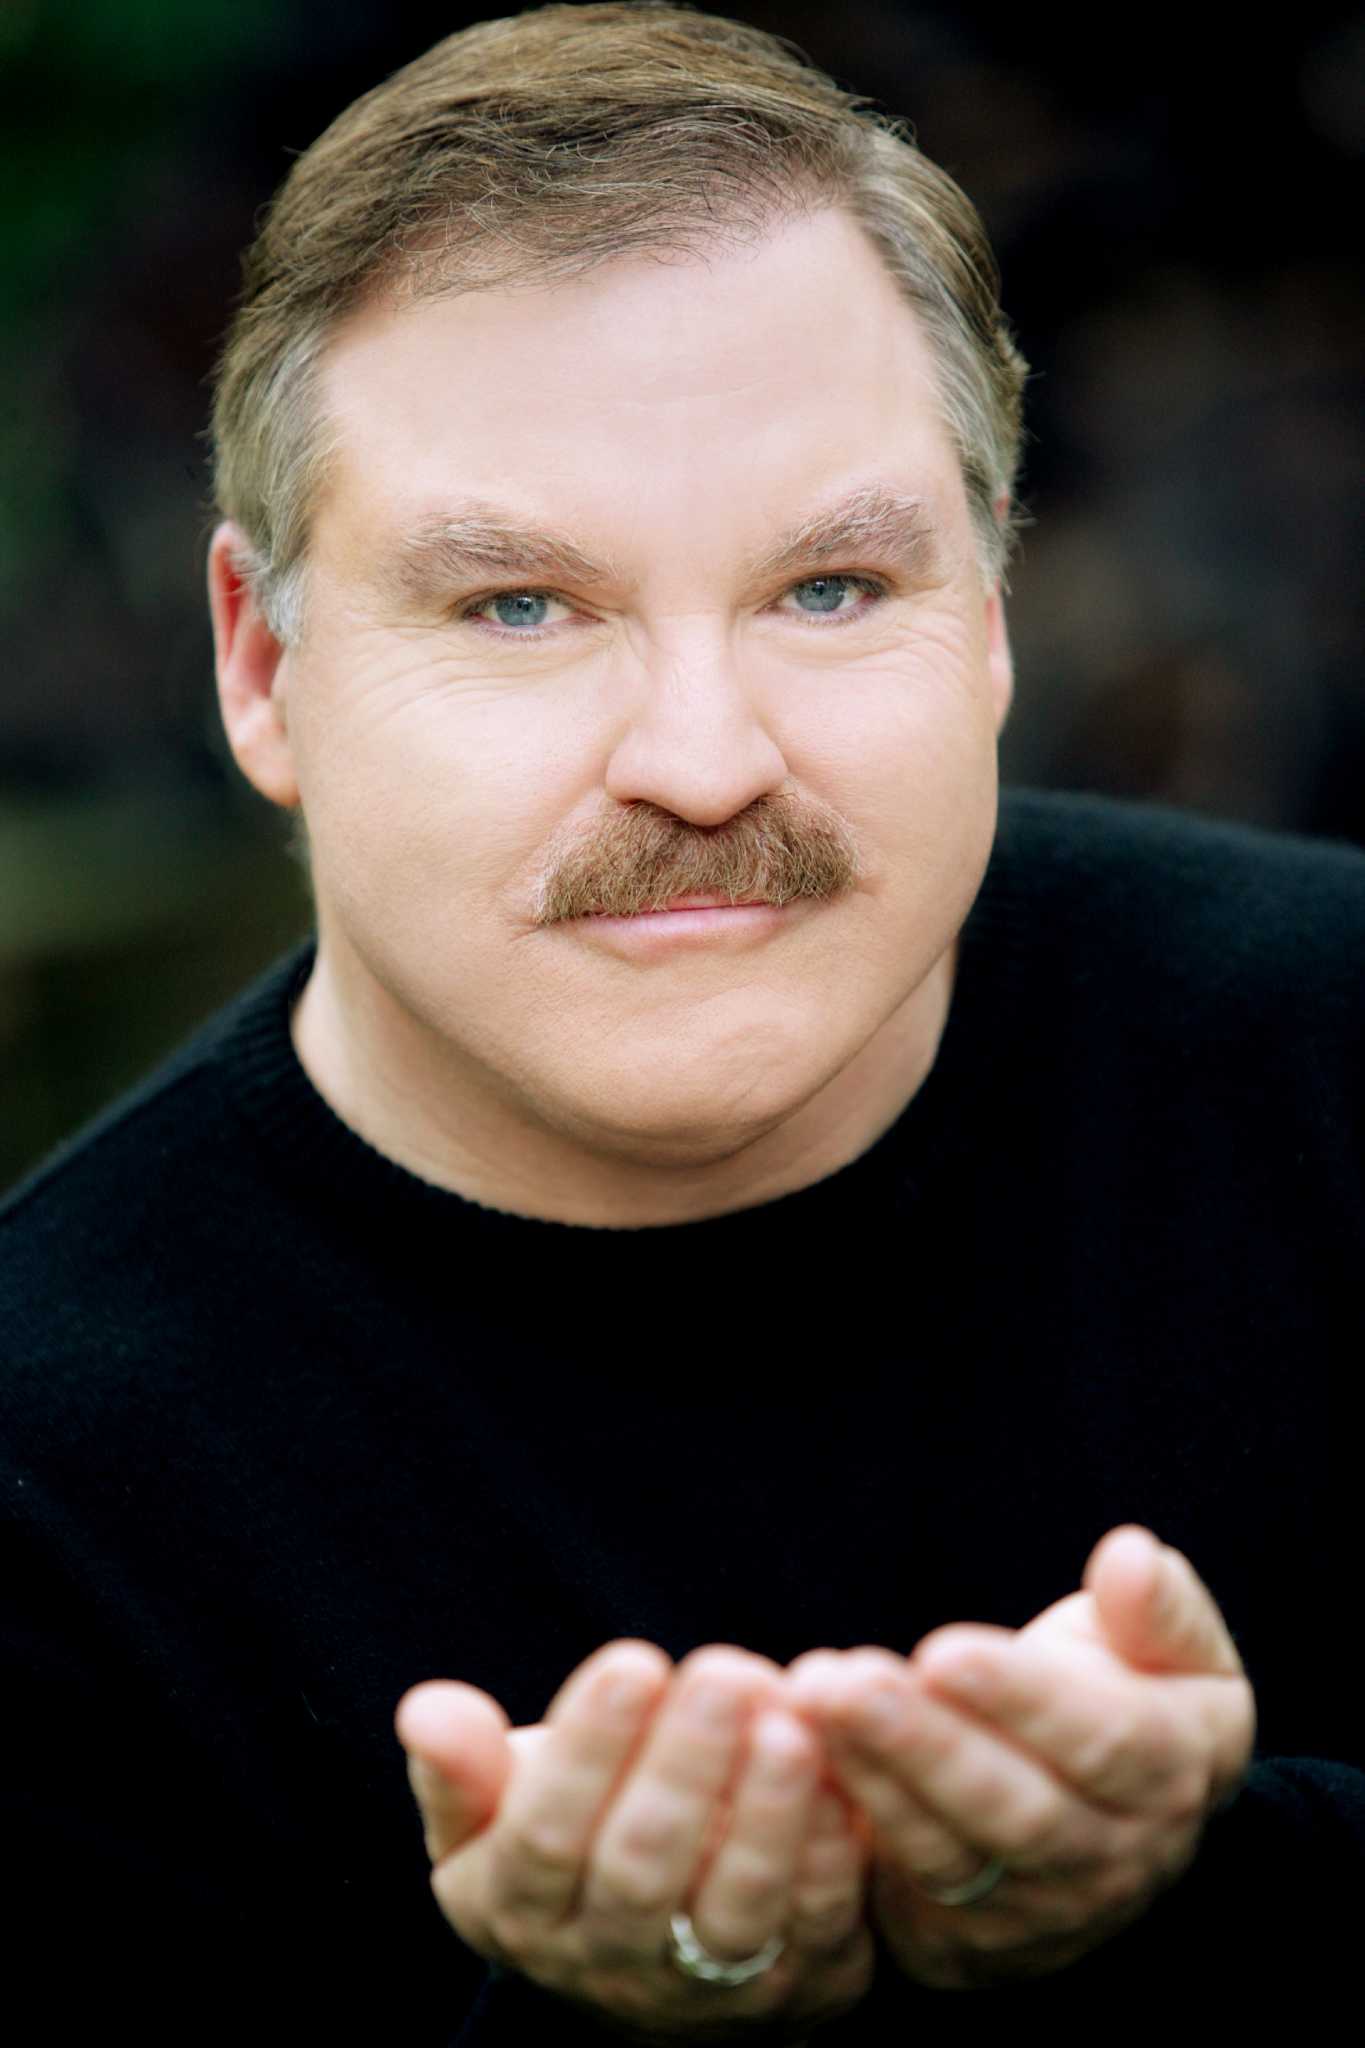 James Van Praagh shares knowledge of afterlife with world of the living